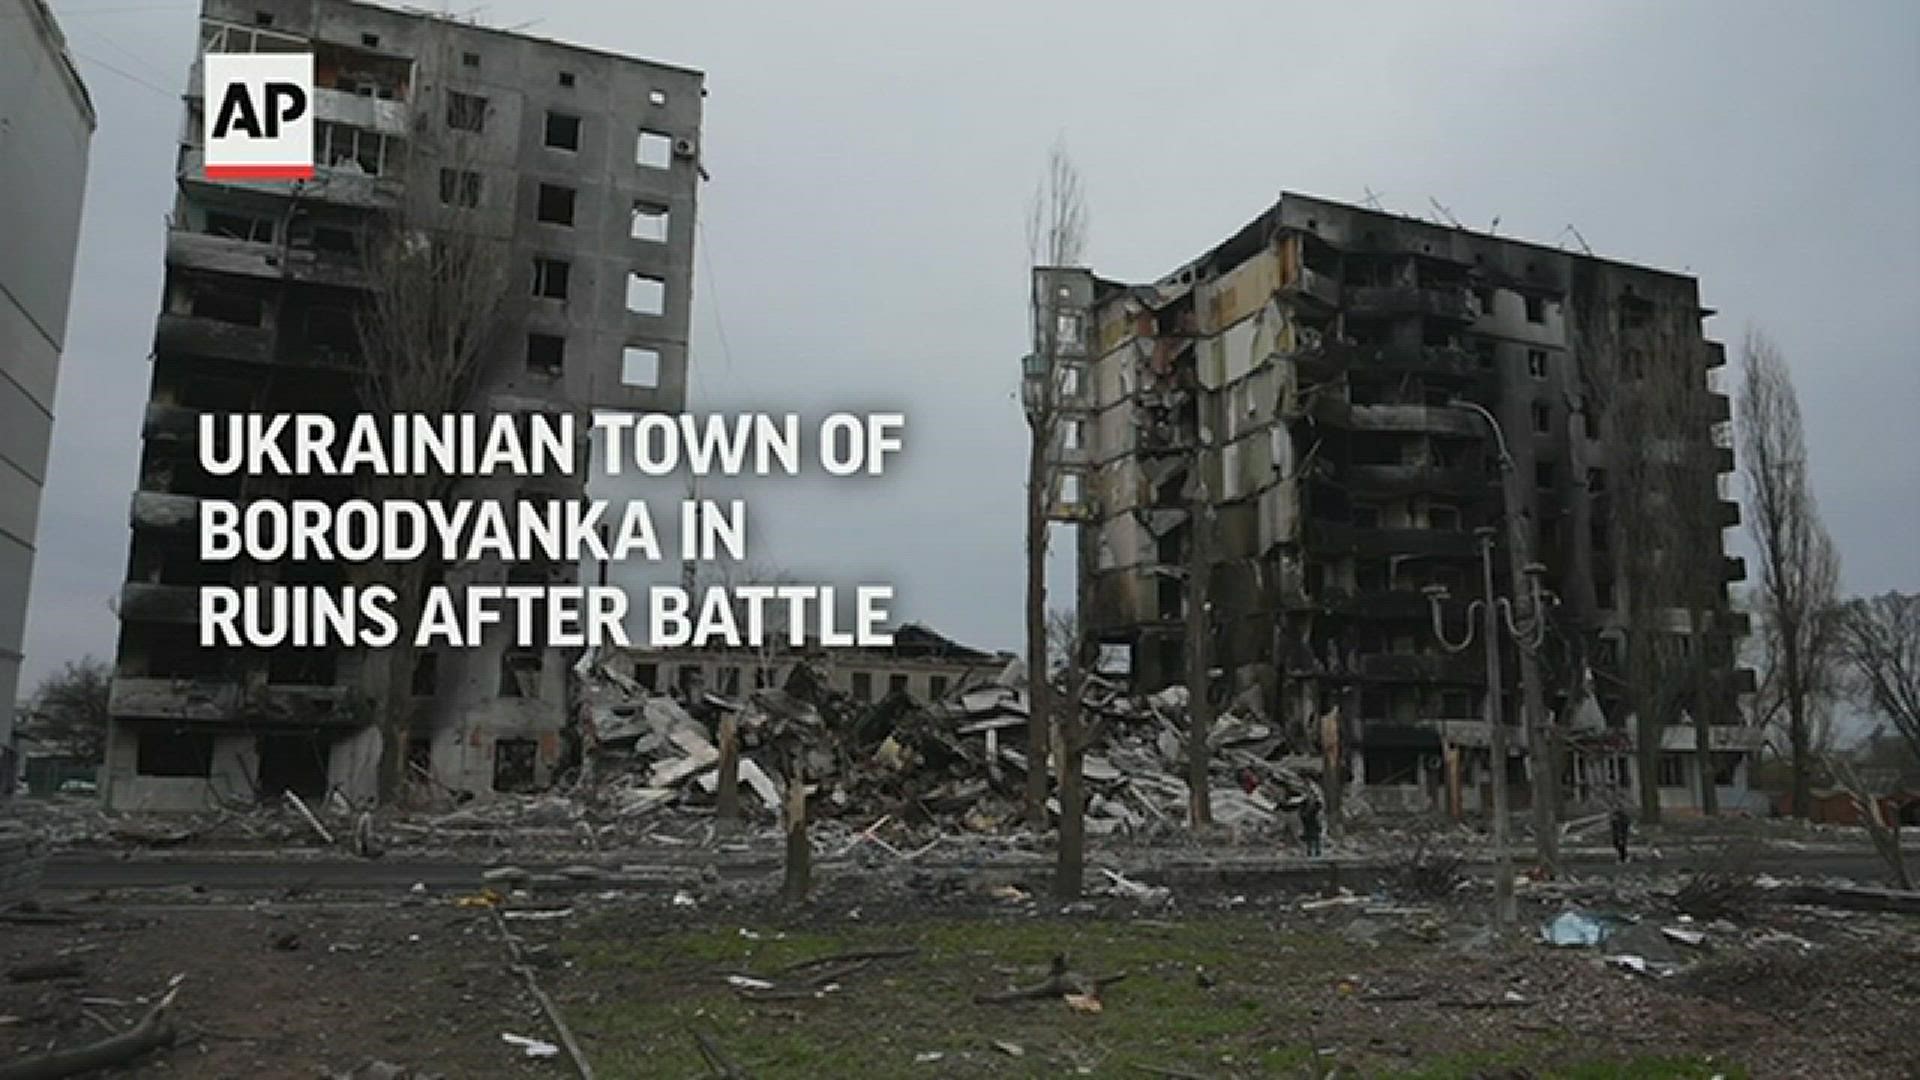 Several apartment buildings were destroyed during fighting between Russian troops and Ukrainian forces in Borodyanka, about 40 miles northwest of Kyiv.